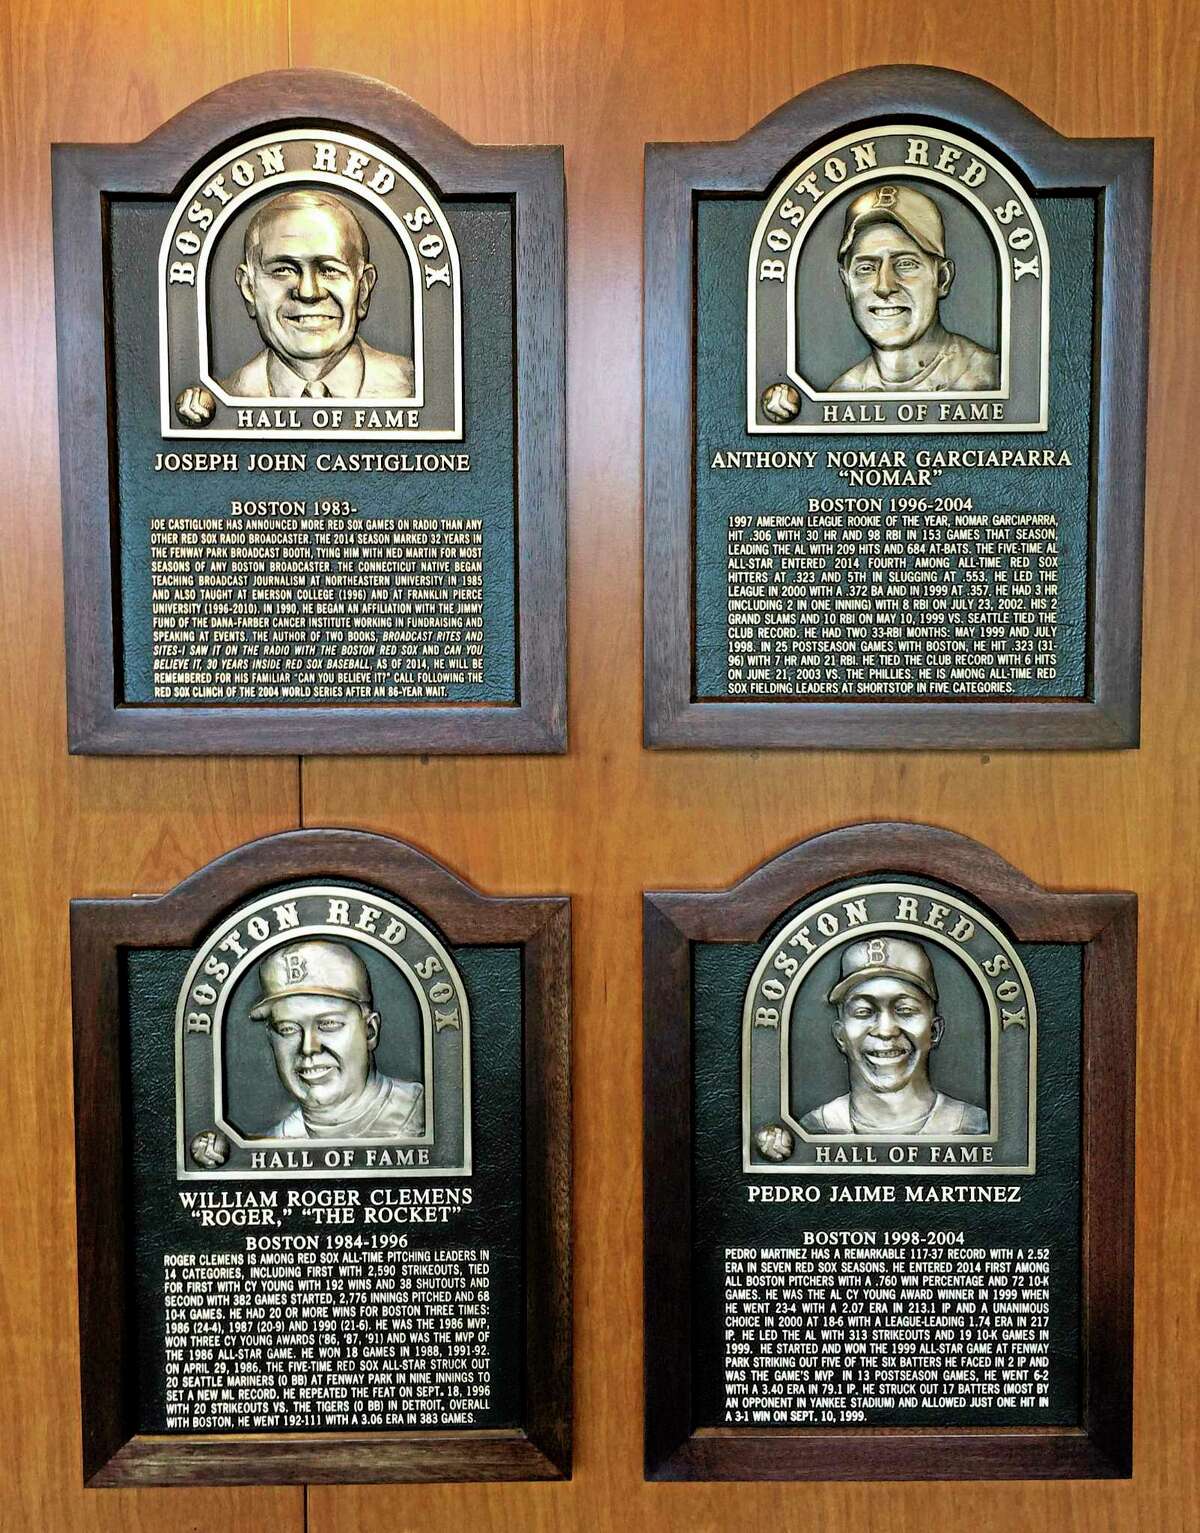 Plaques for 2014 Boston Red Sox Hall of Fame inductees hang at Fenway Park Thursday, Aug. 14, 2014 in Boston. Clockwise from top left are plaques honoring broadcaster Joe Castiglione, shortstop Nomar Garciaparra, pitcher Pedro Martinez and pitcher Roger Clemens. The four men will be honored before Thurday night's game against the Houston Astros. (AP Photo/Jimmy Golen)